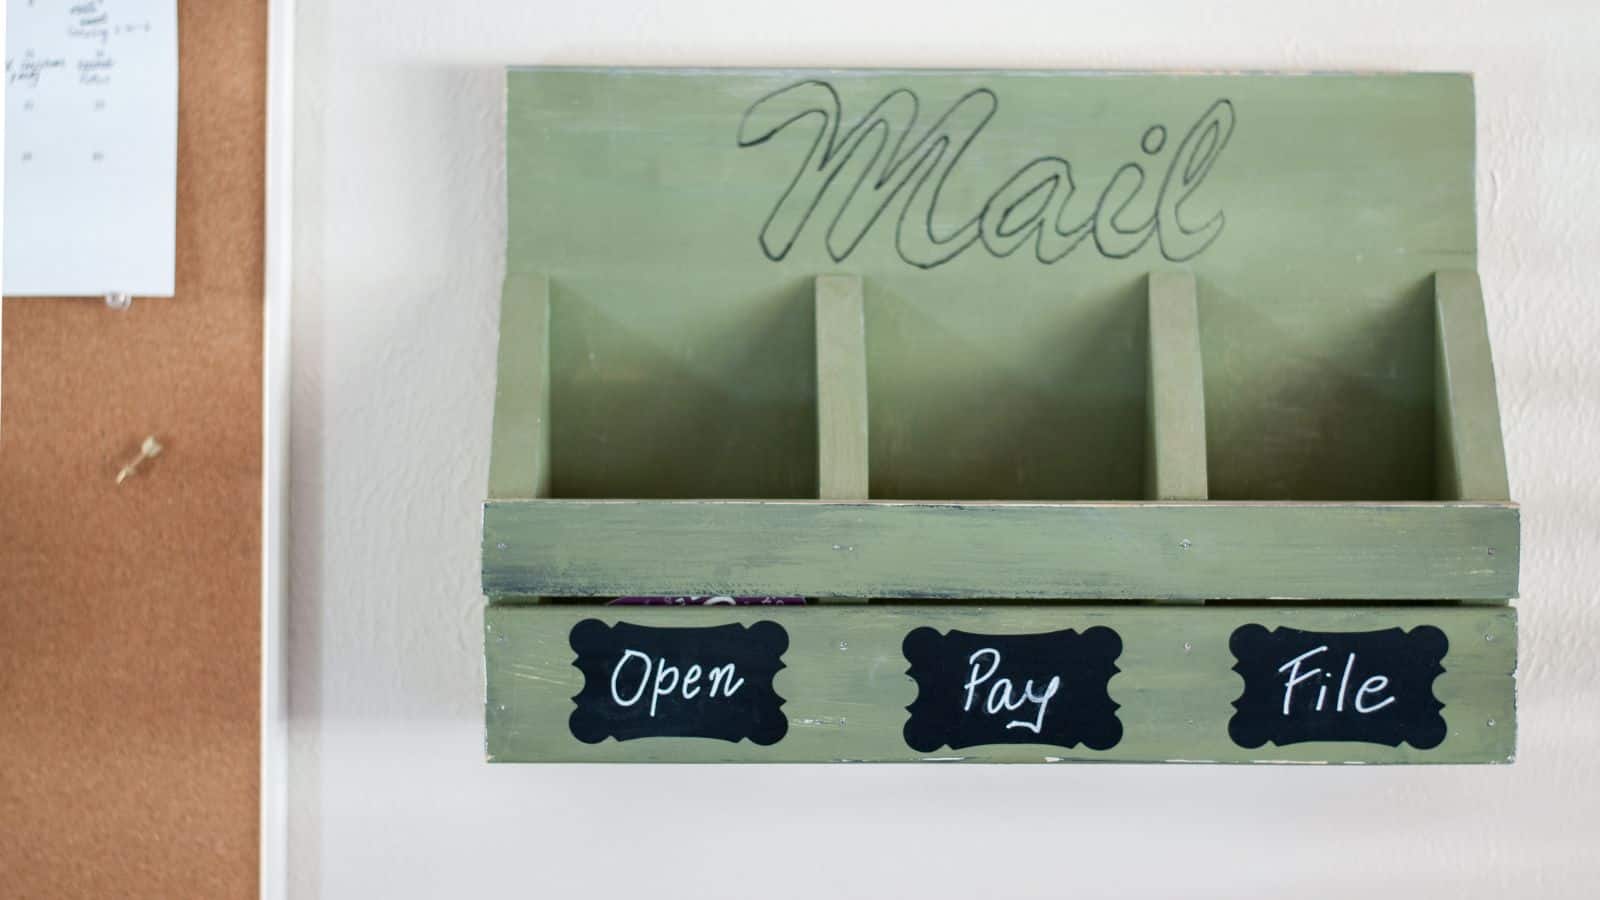 <p>No power tools are needed to make this easy DIY mail organizer. It can be made using a miter box, a hand saw, and a hammer. It’s a quick and easy project that kids can make, and it makes a great gift! <a href="https://www.anikasdiylife.com/easy-diy-wall-mail-organizer/">Plans and video tutorial here.</a></p>